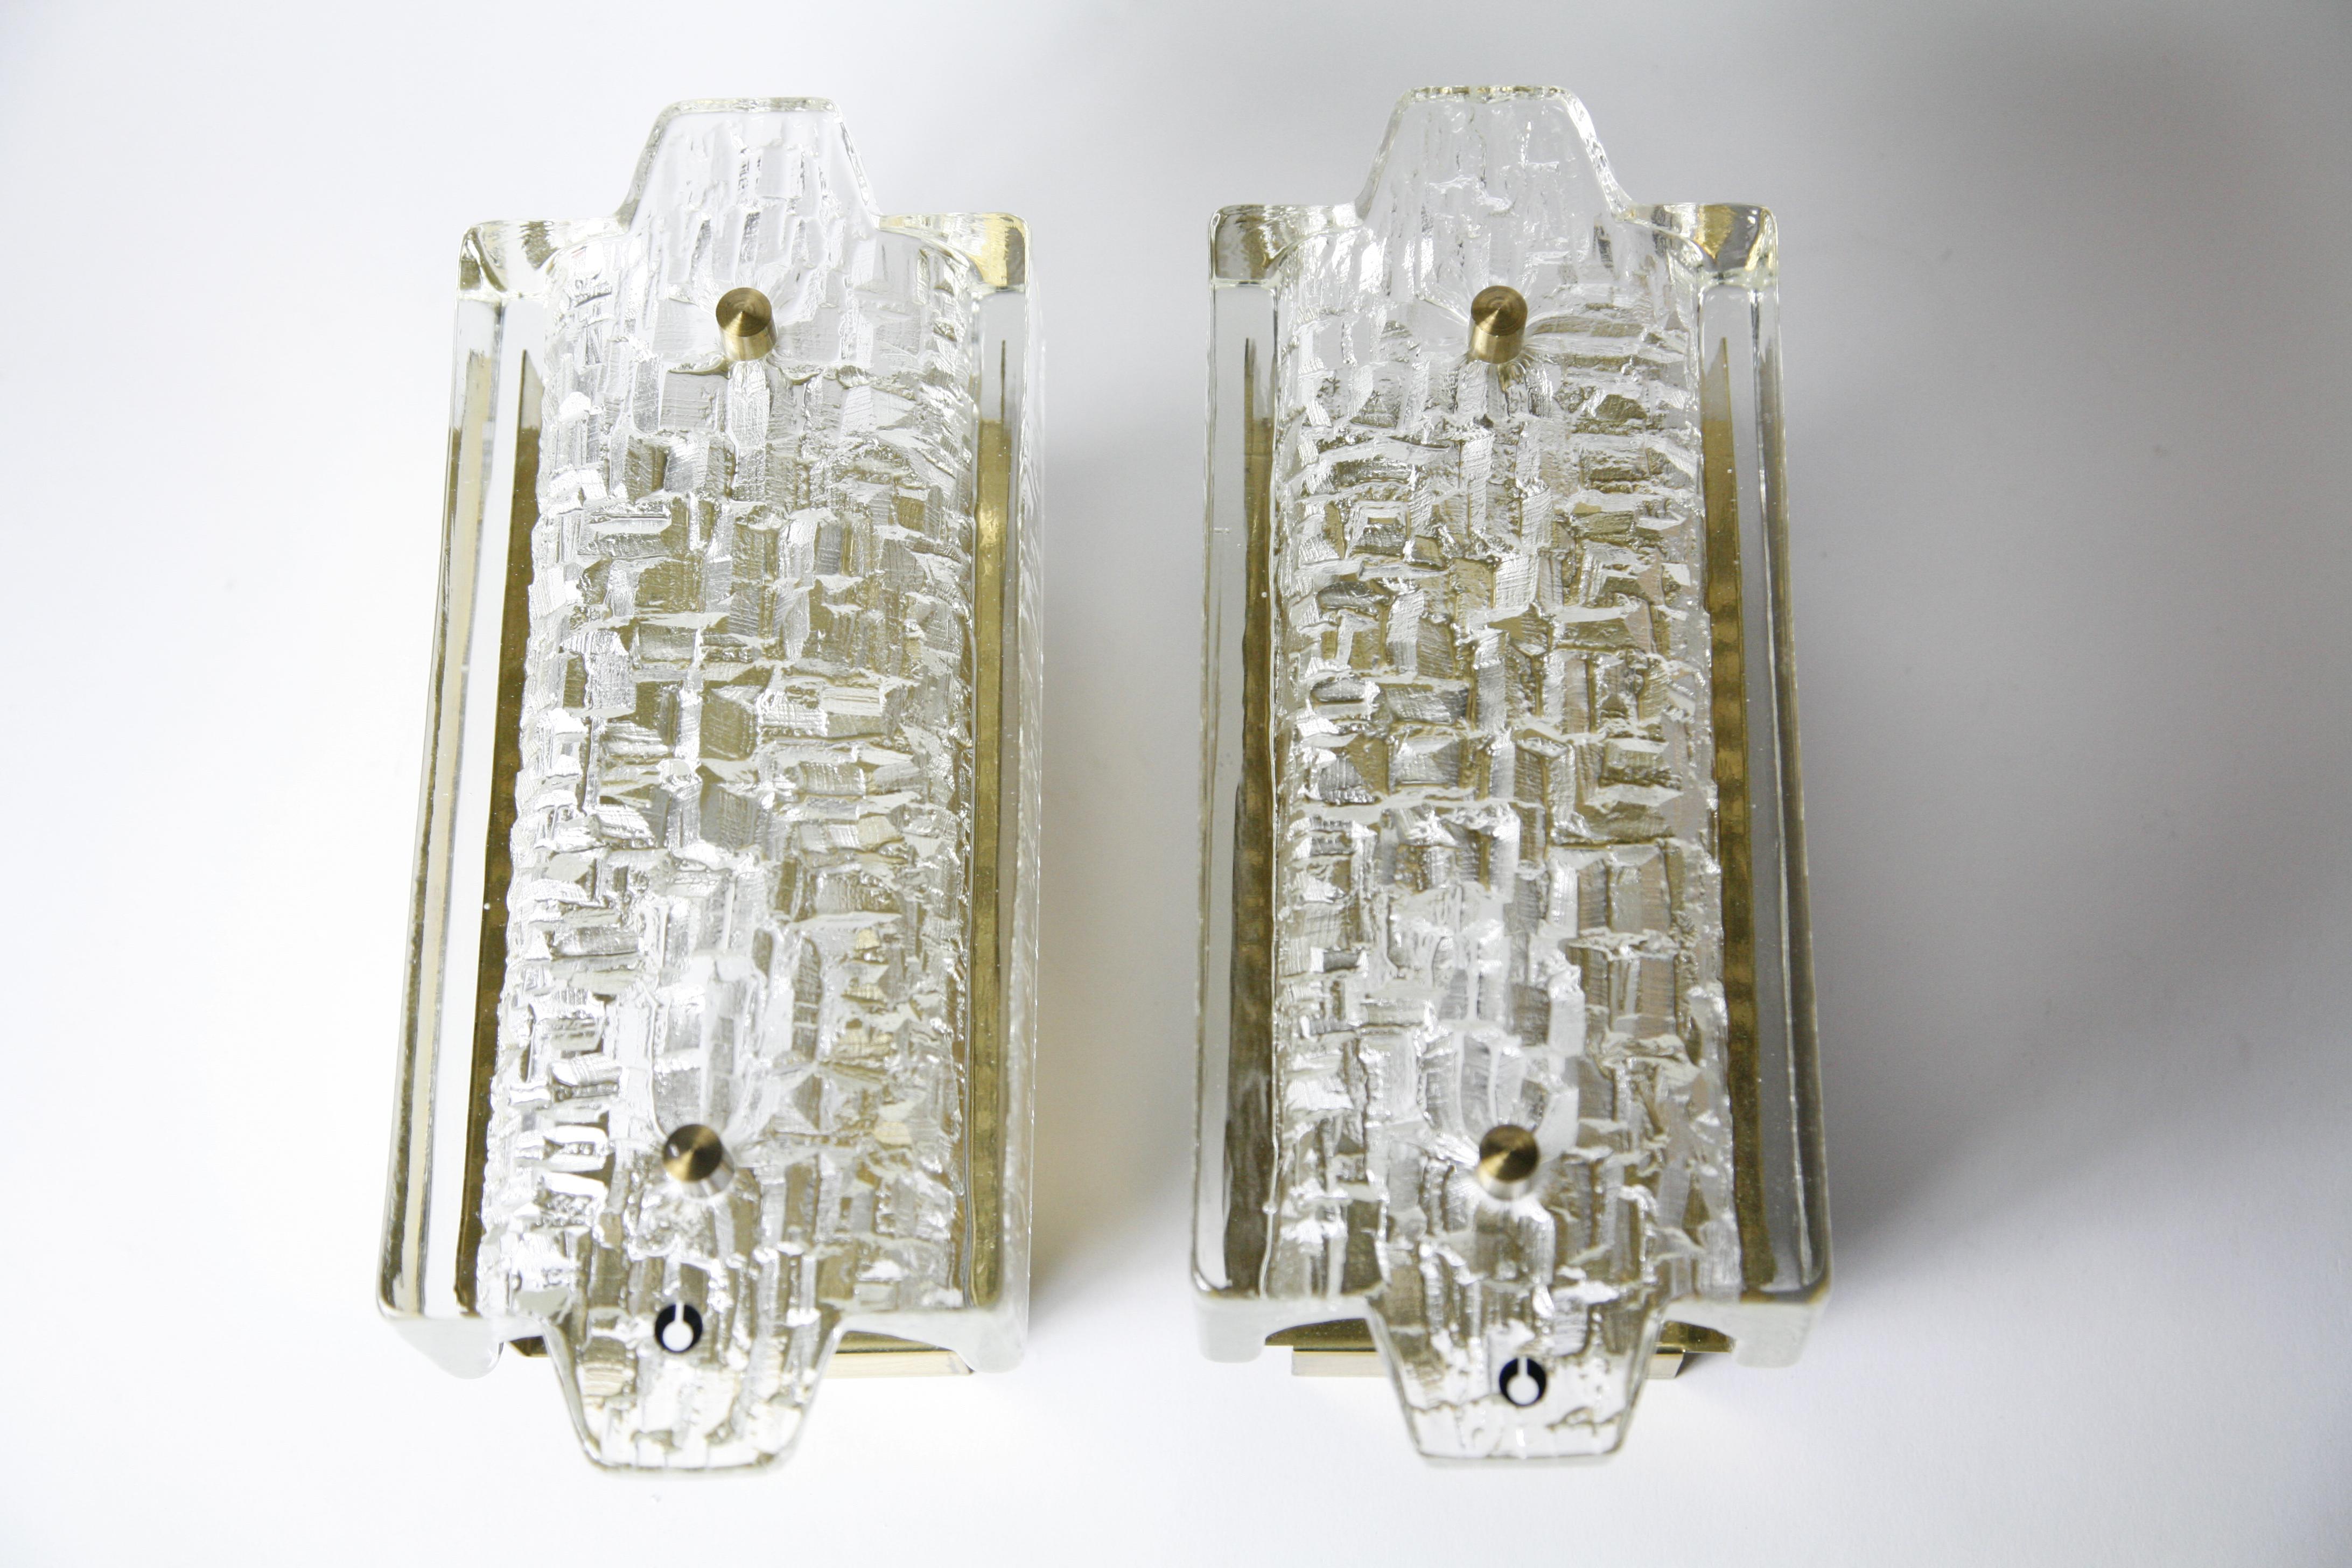 Pair of Orrefors Sconces Brass and Crystal Glass Shades by Orrefors, Sweden 1970 For Sale 2